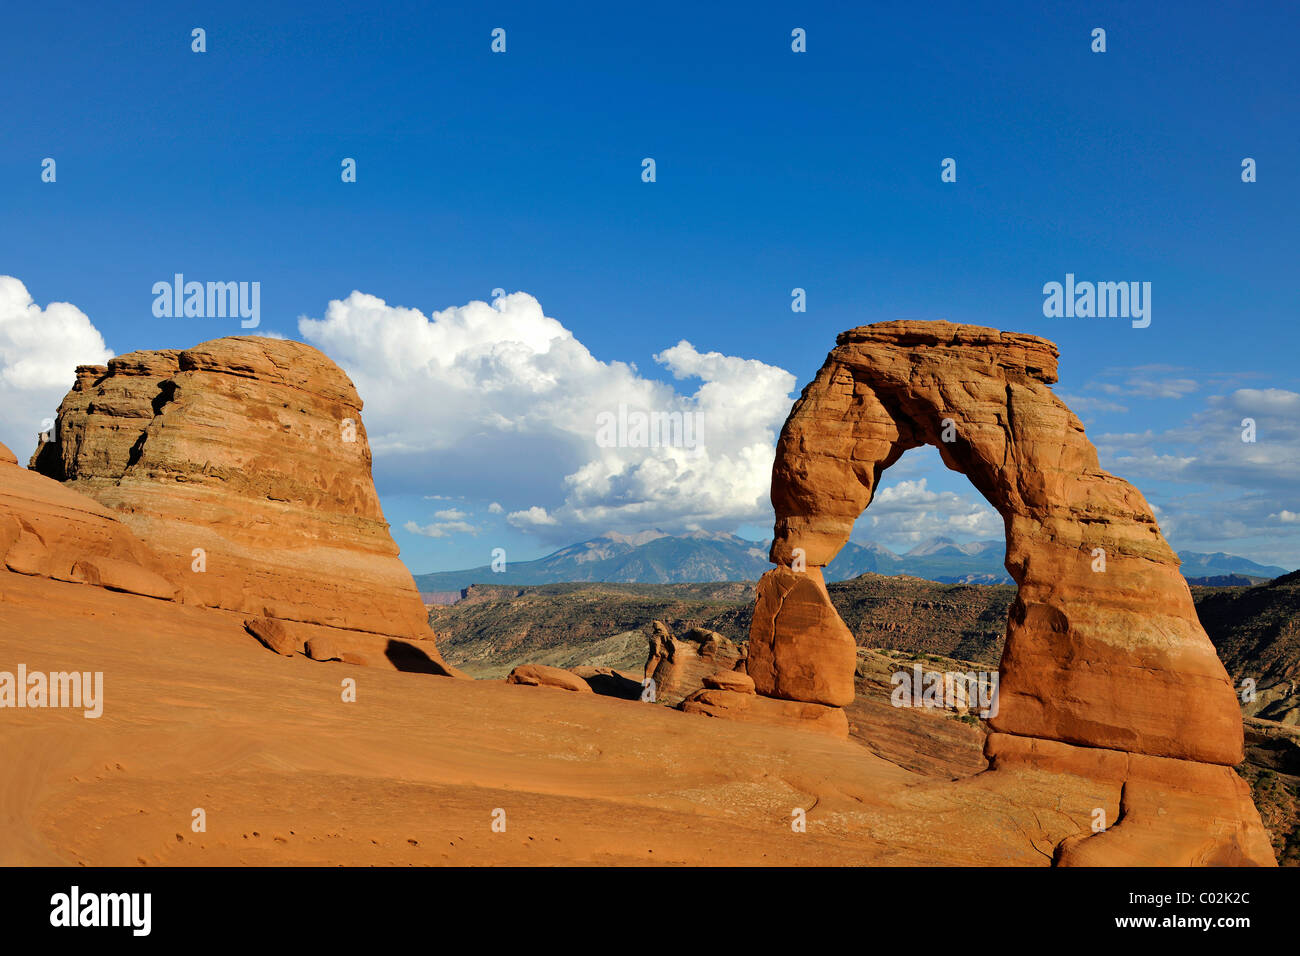 Delicate Arch, rock arch, La Sal Mountains, Arches National Park, Moab, Utah, Southwestern United States Stock Photo